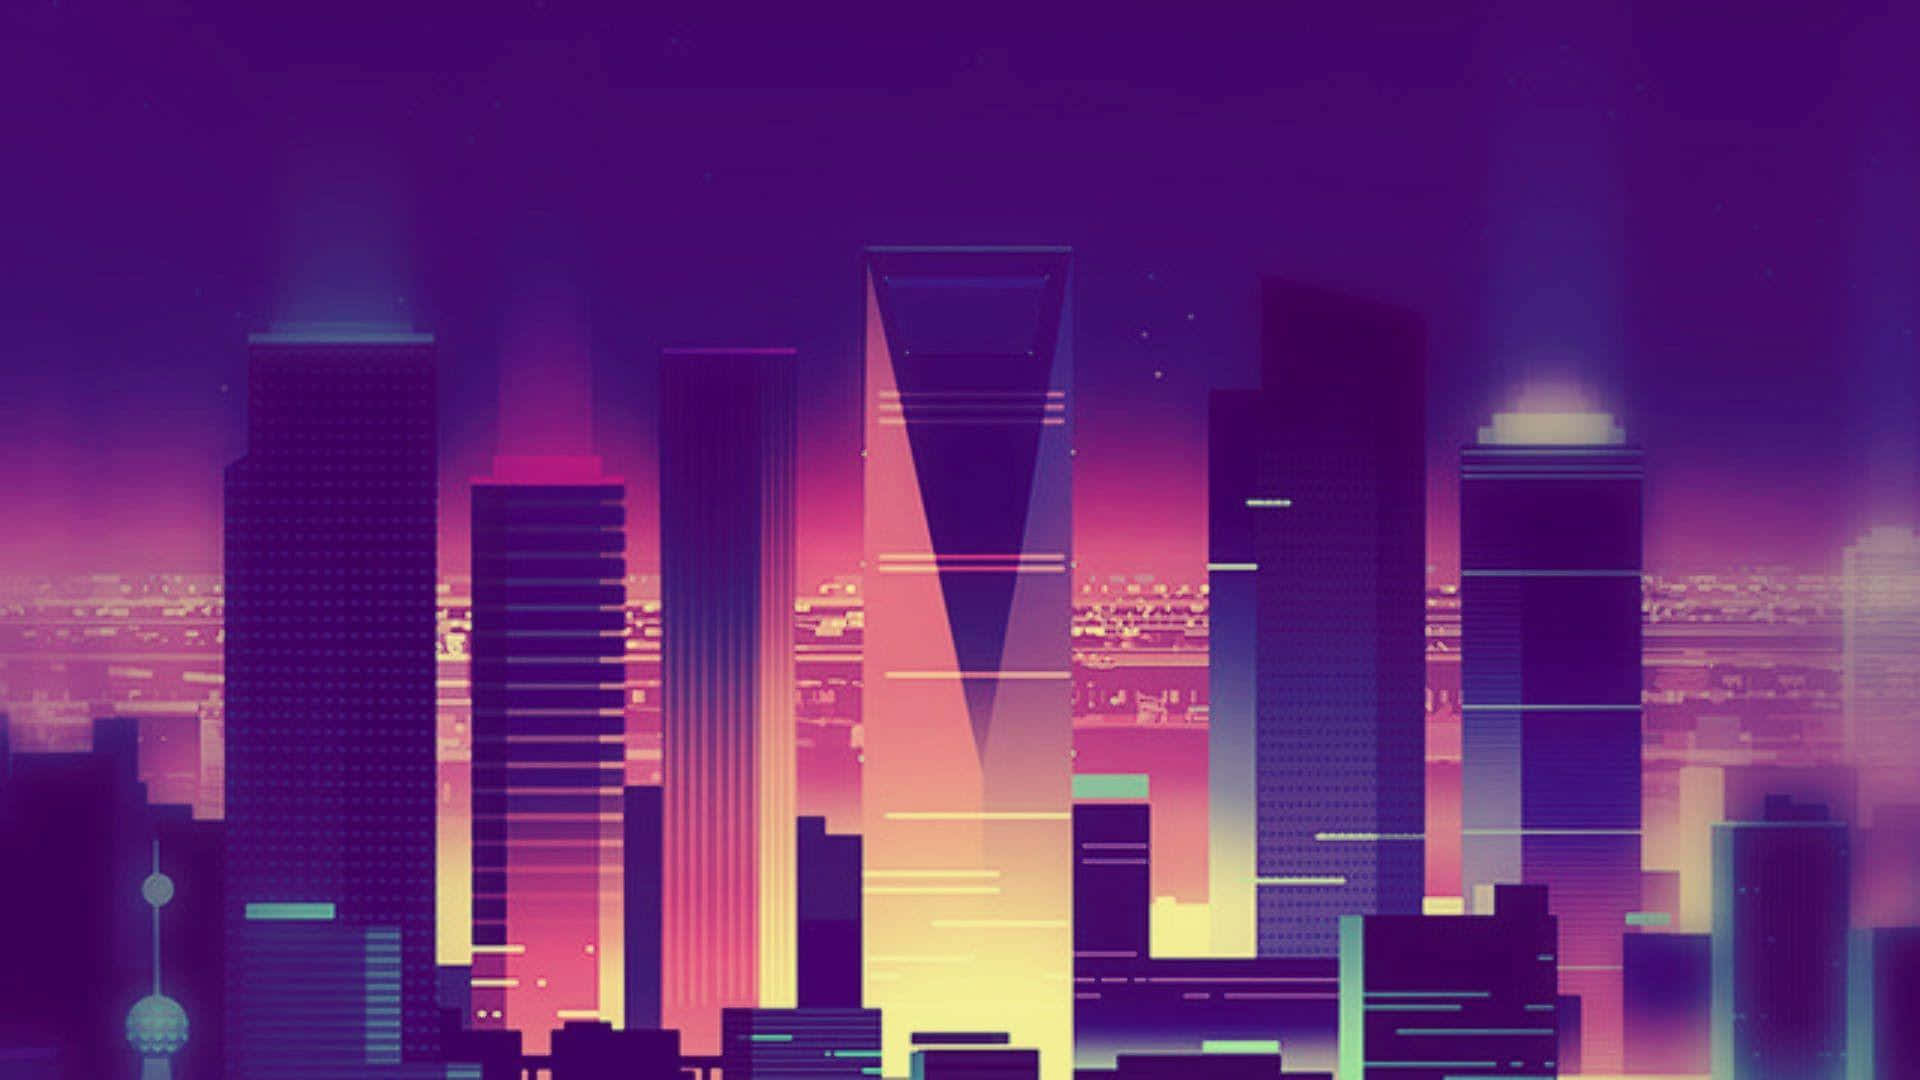 Beautiful Retro Wave background of a cinematic city